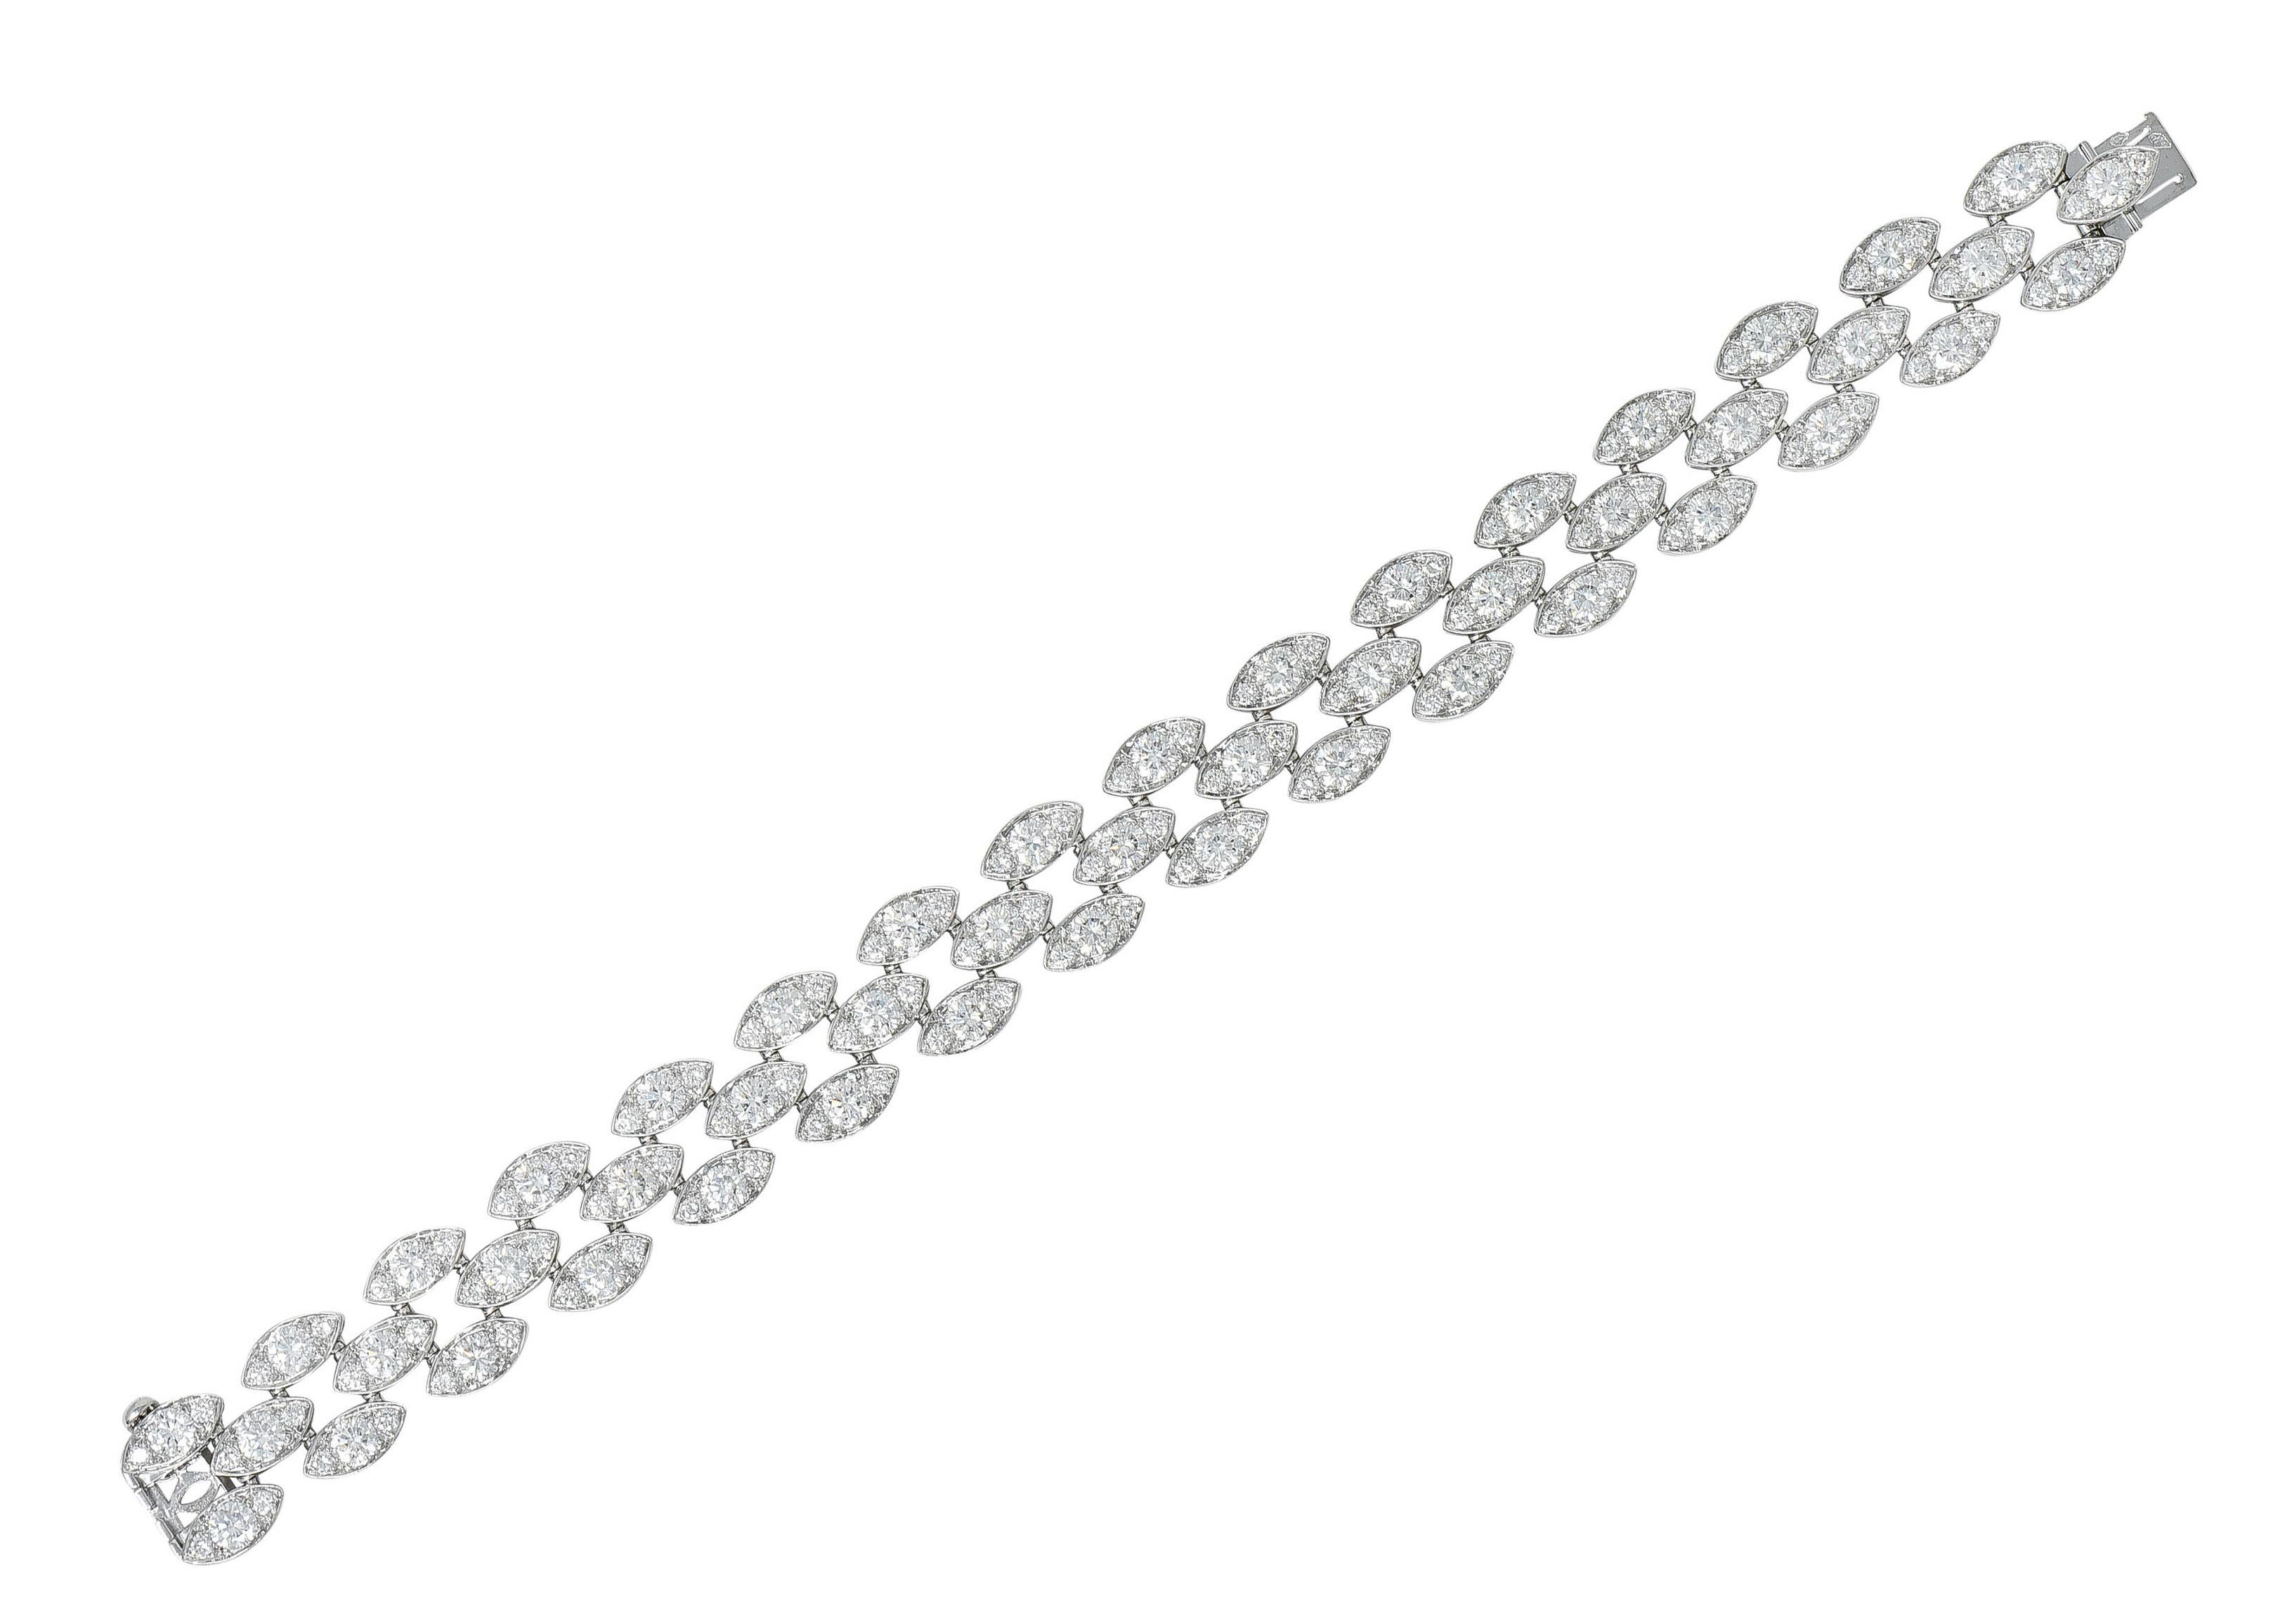 Line bracelet is comprised of three rows of navette shaped links

Each bead set with a trio of round brilliant cut diamonds

Weighing in total approximately 11.04 carats with G to I color and VS clarity

Completed by a concealed clasp with a